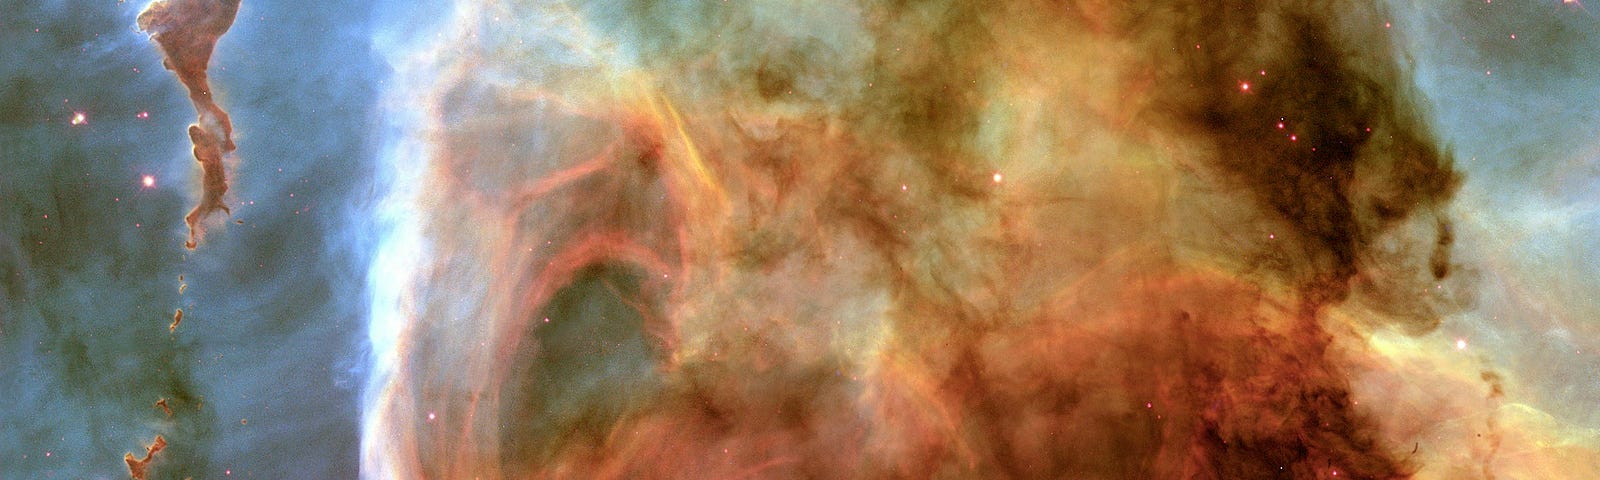 Cosmic gas clouds, or nebulae, with splashes of orange and blue